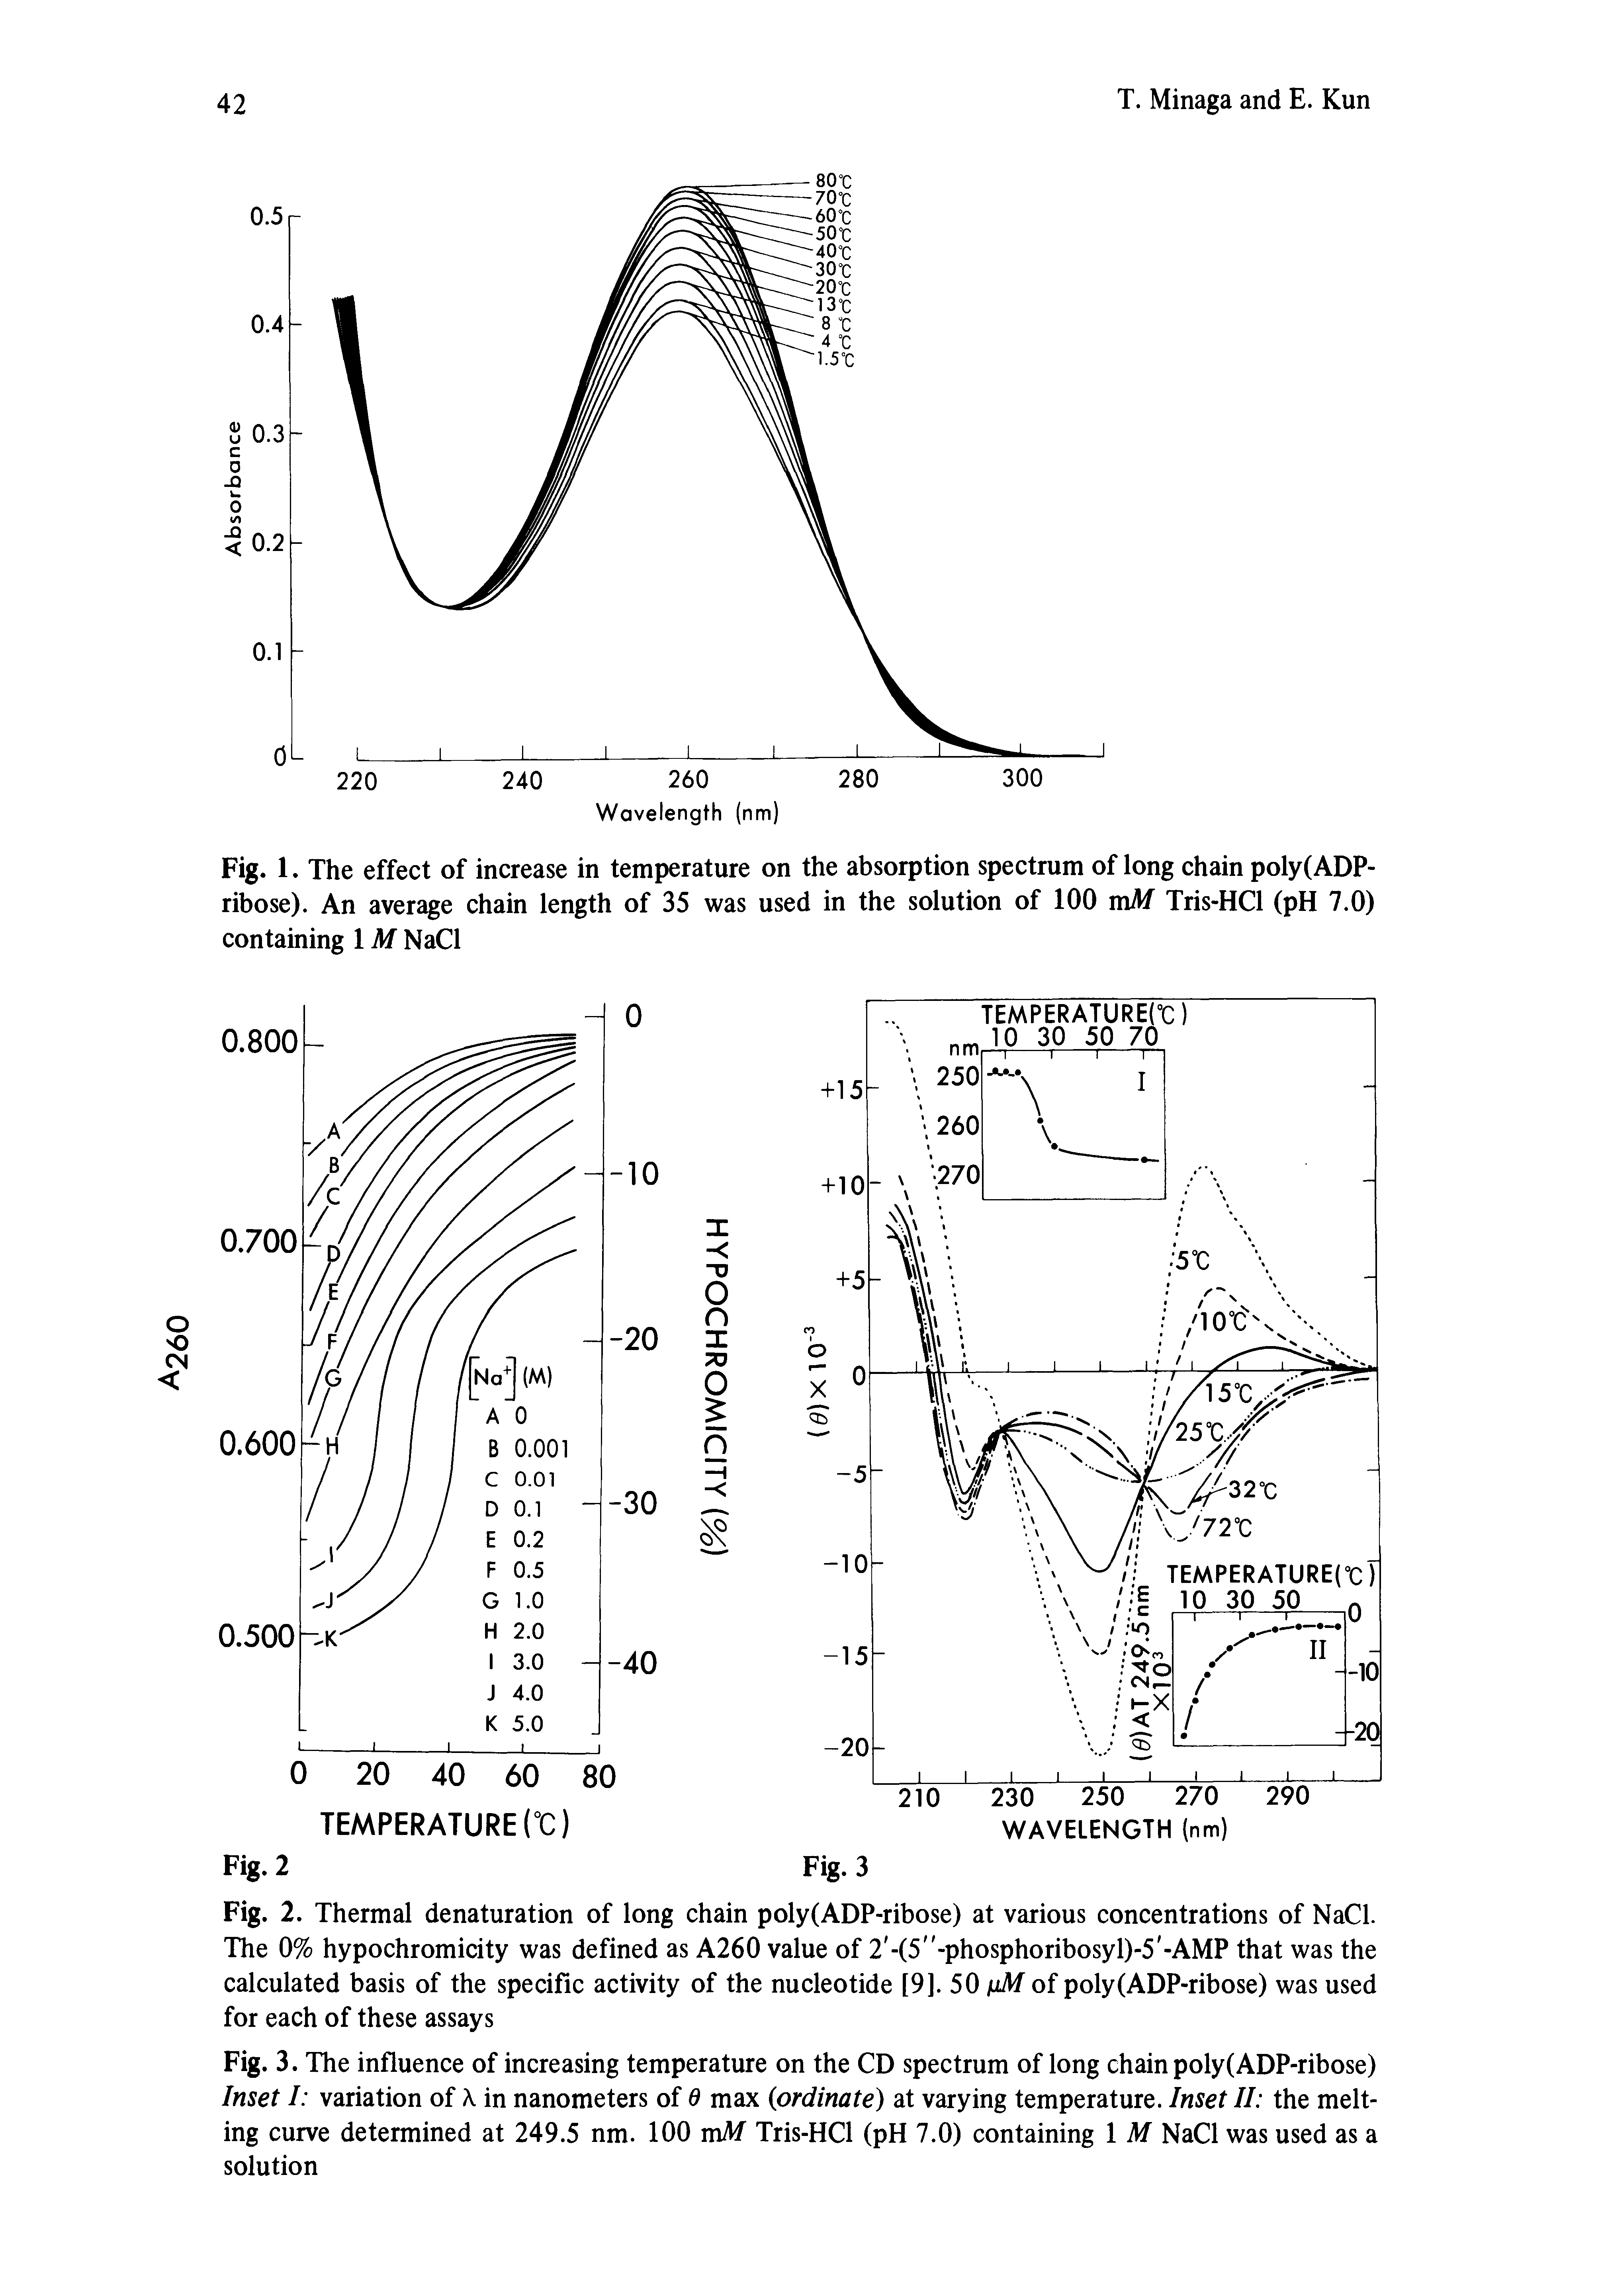 Fig. 2. Thermal denaturation of long chain poly(ADP-ribose) at various concentrations of NaCl. The 0% hypochromicity was defined as A260 value of 2 -(5"-phosphoribosyl)-5 -AMP that was the calculated basis of the specific activity of the nucleotide [9]. 50 iiM of poly(ADP-ribose) was used for each of these assays...